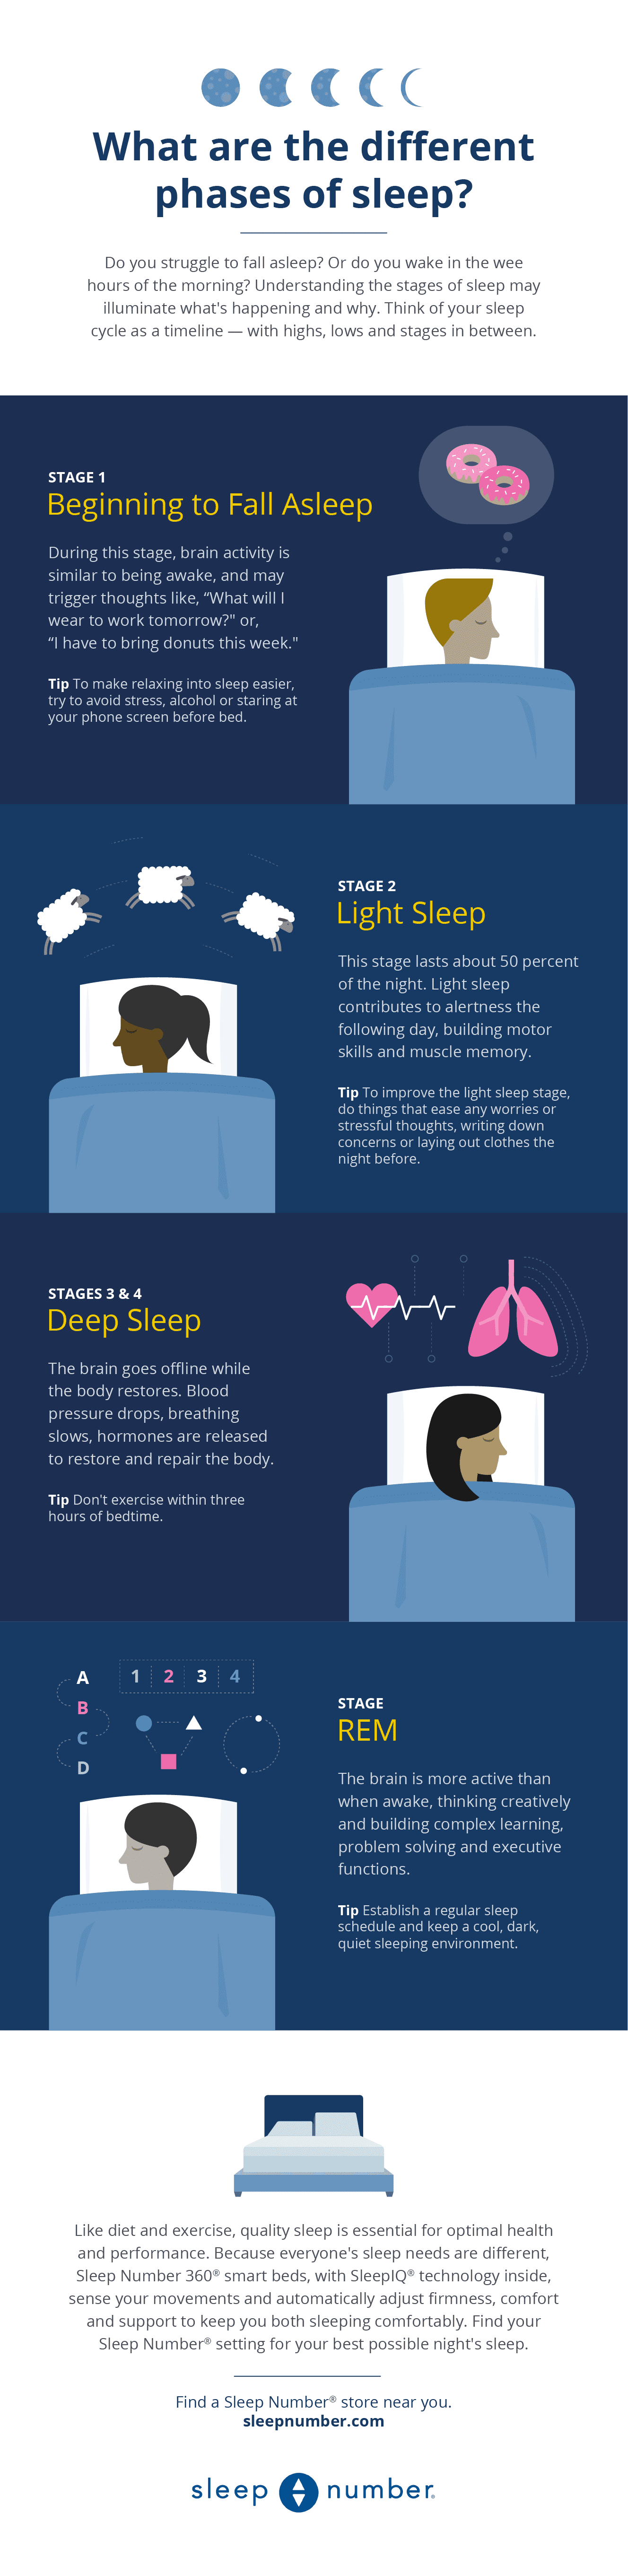 Types of Sleep and How to Get a Restful Sleep